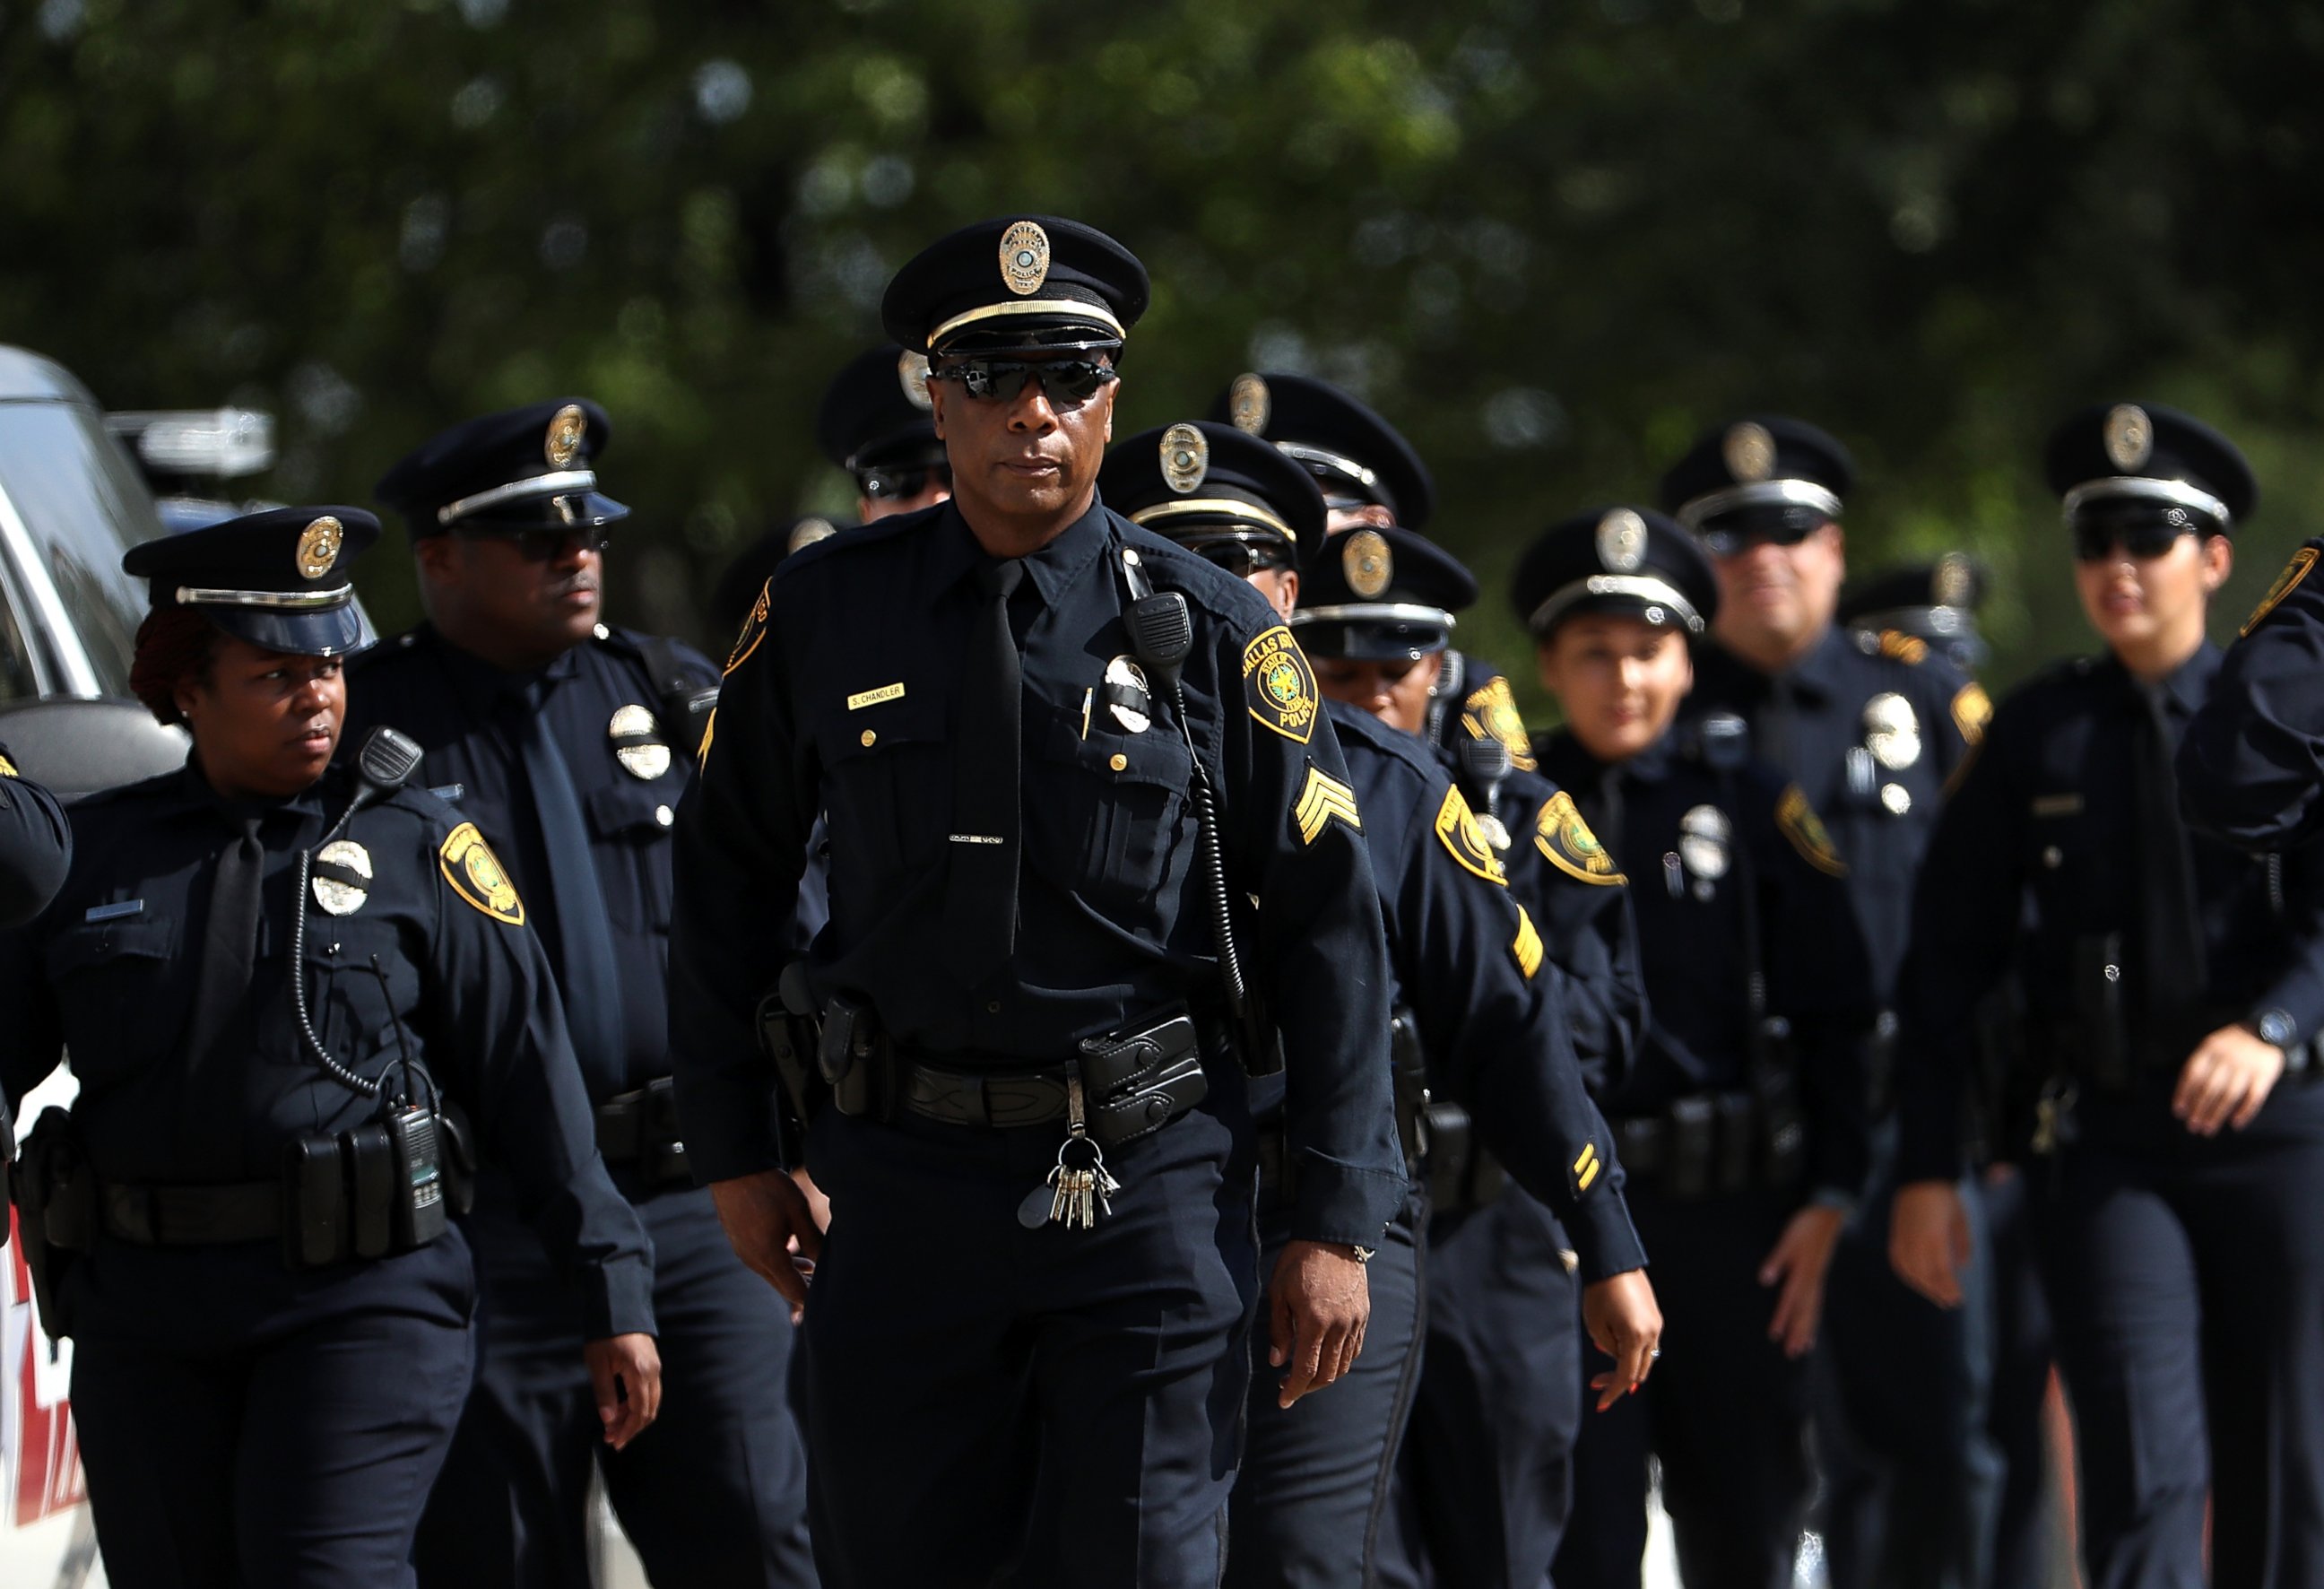 PHOTO: Police officers arrive at a funeral service for slain Dallas Area Rapid Transit (DART) police officer Brent Thompson at the Potter House Church on July 13, 2016 in Dallas.